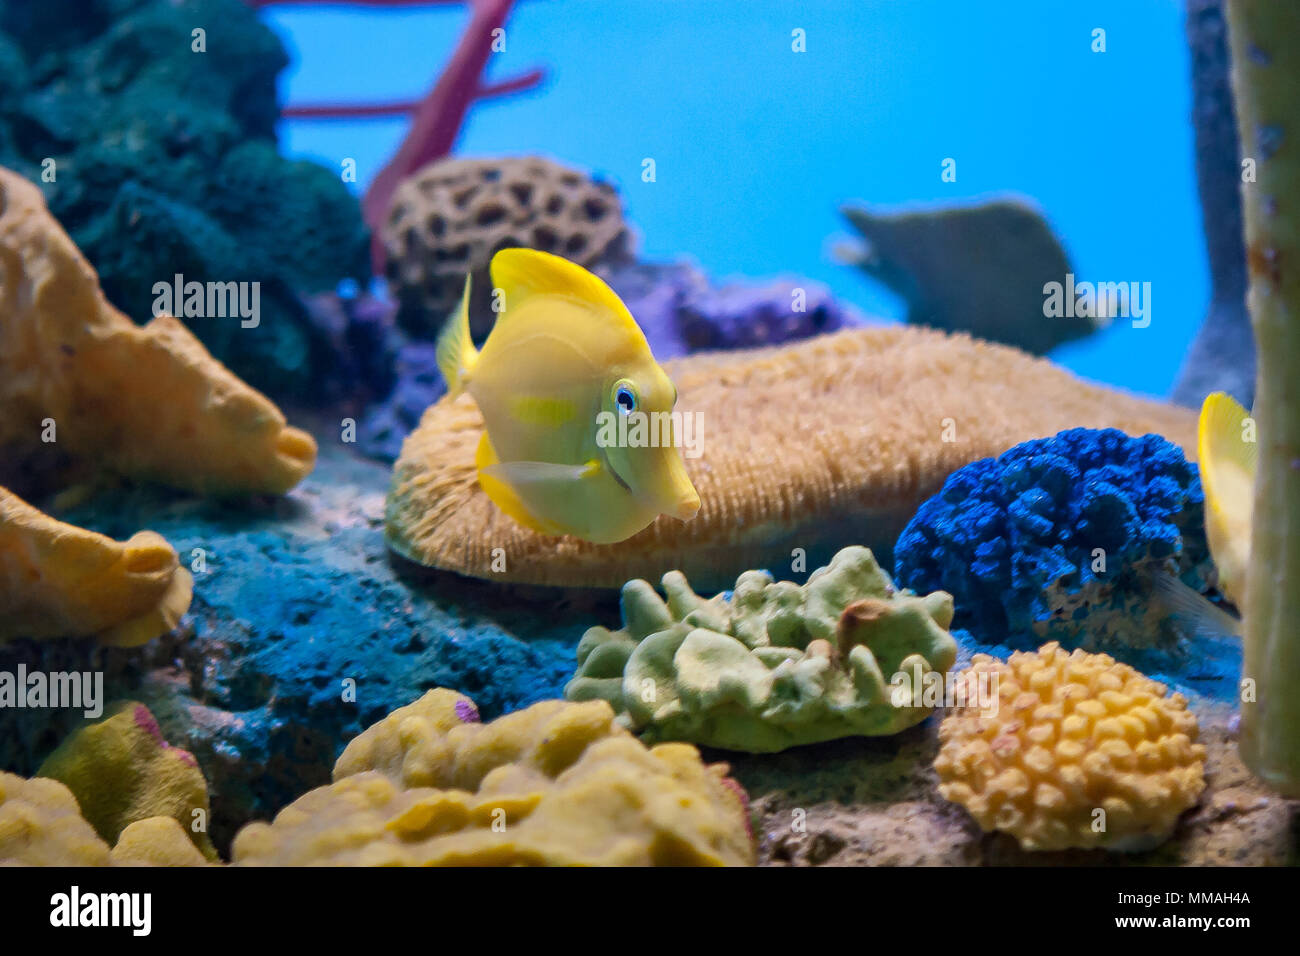 The yellow angelfish is swimming past a coral display in the aquarium Stock Photo